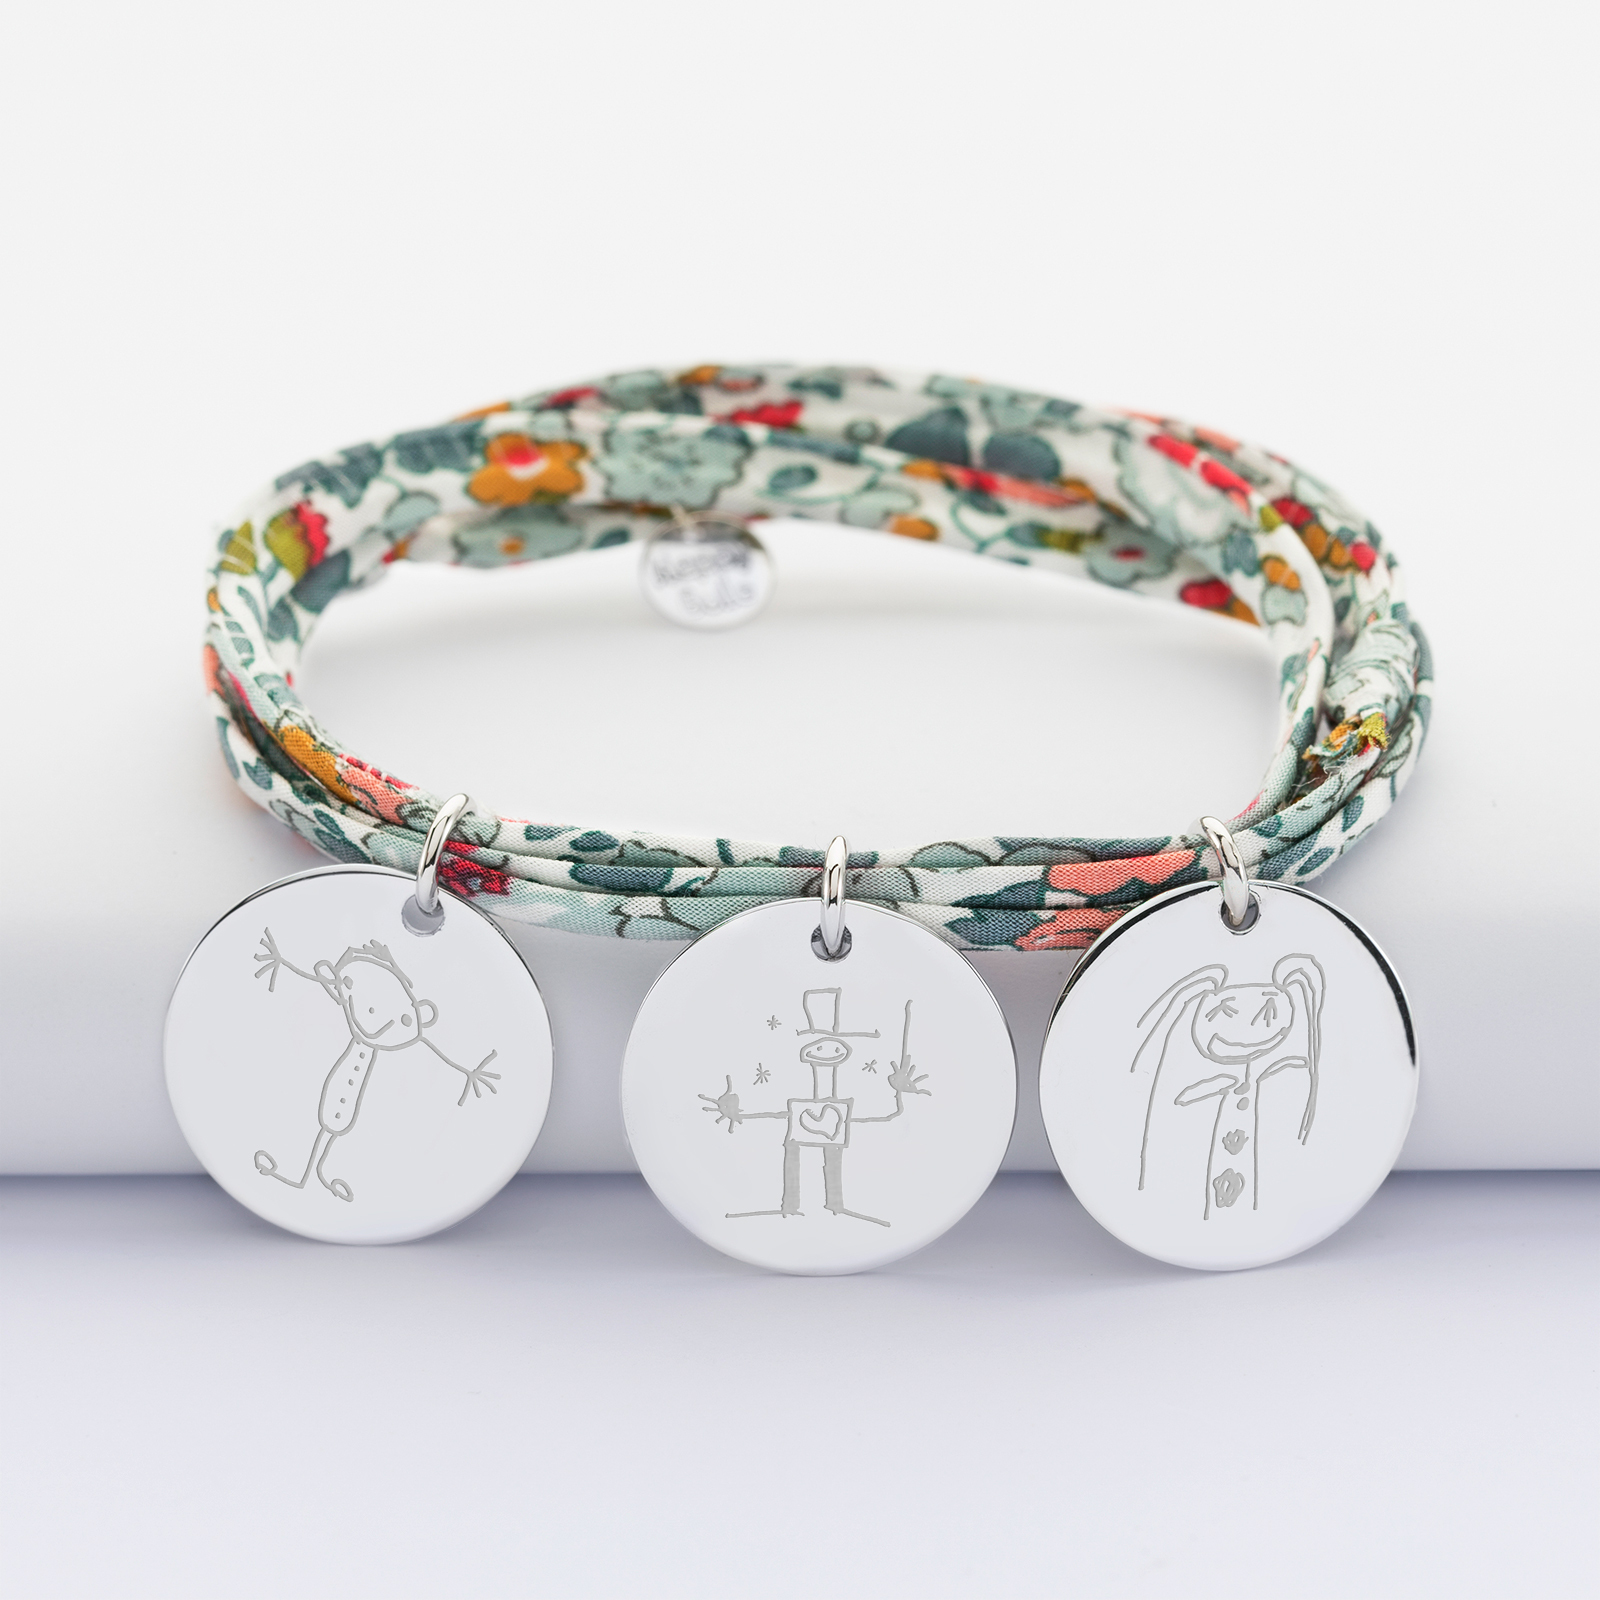 Liberty 3 turn bracelet with 3 personalised engraved silver medallions 19 mm - sketches imprints writing mix